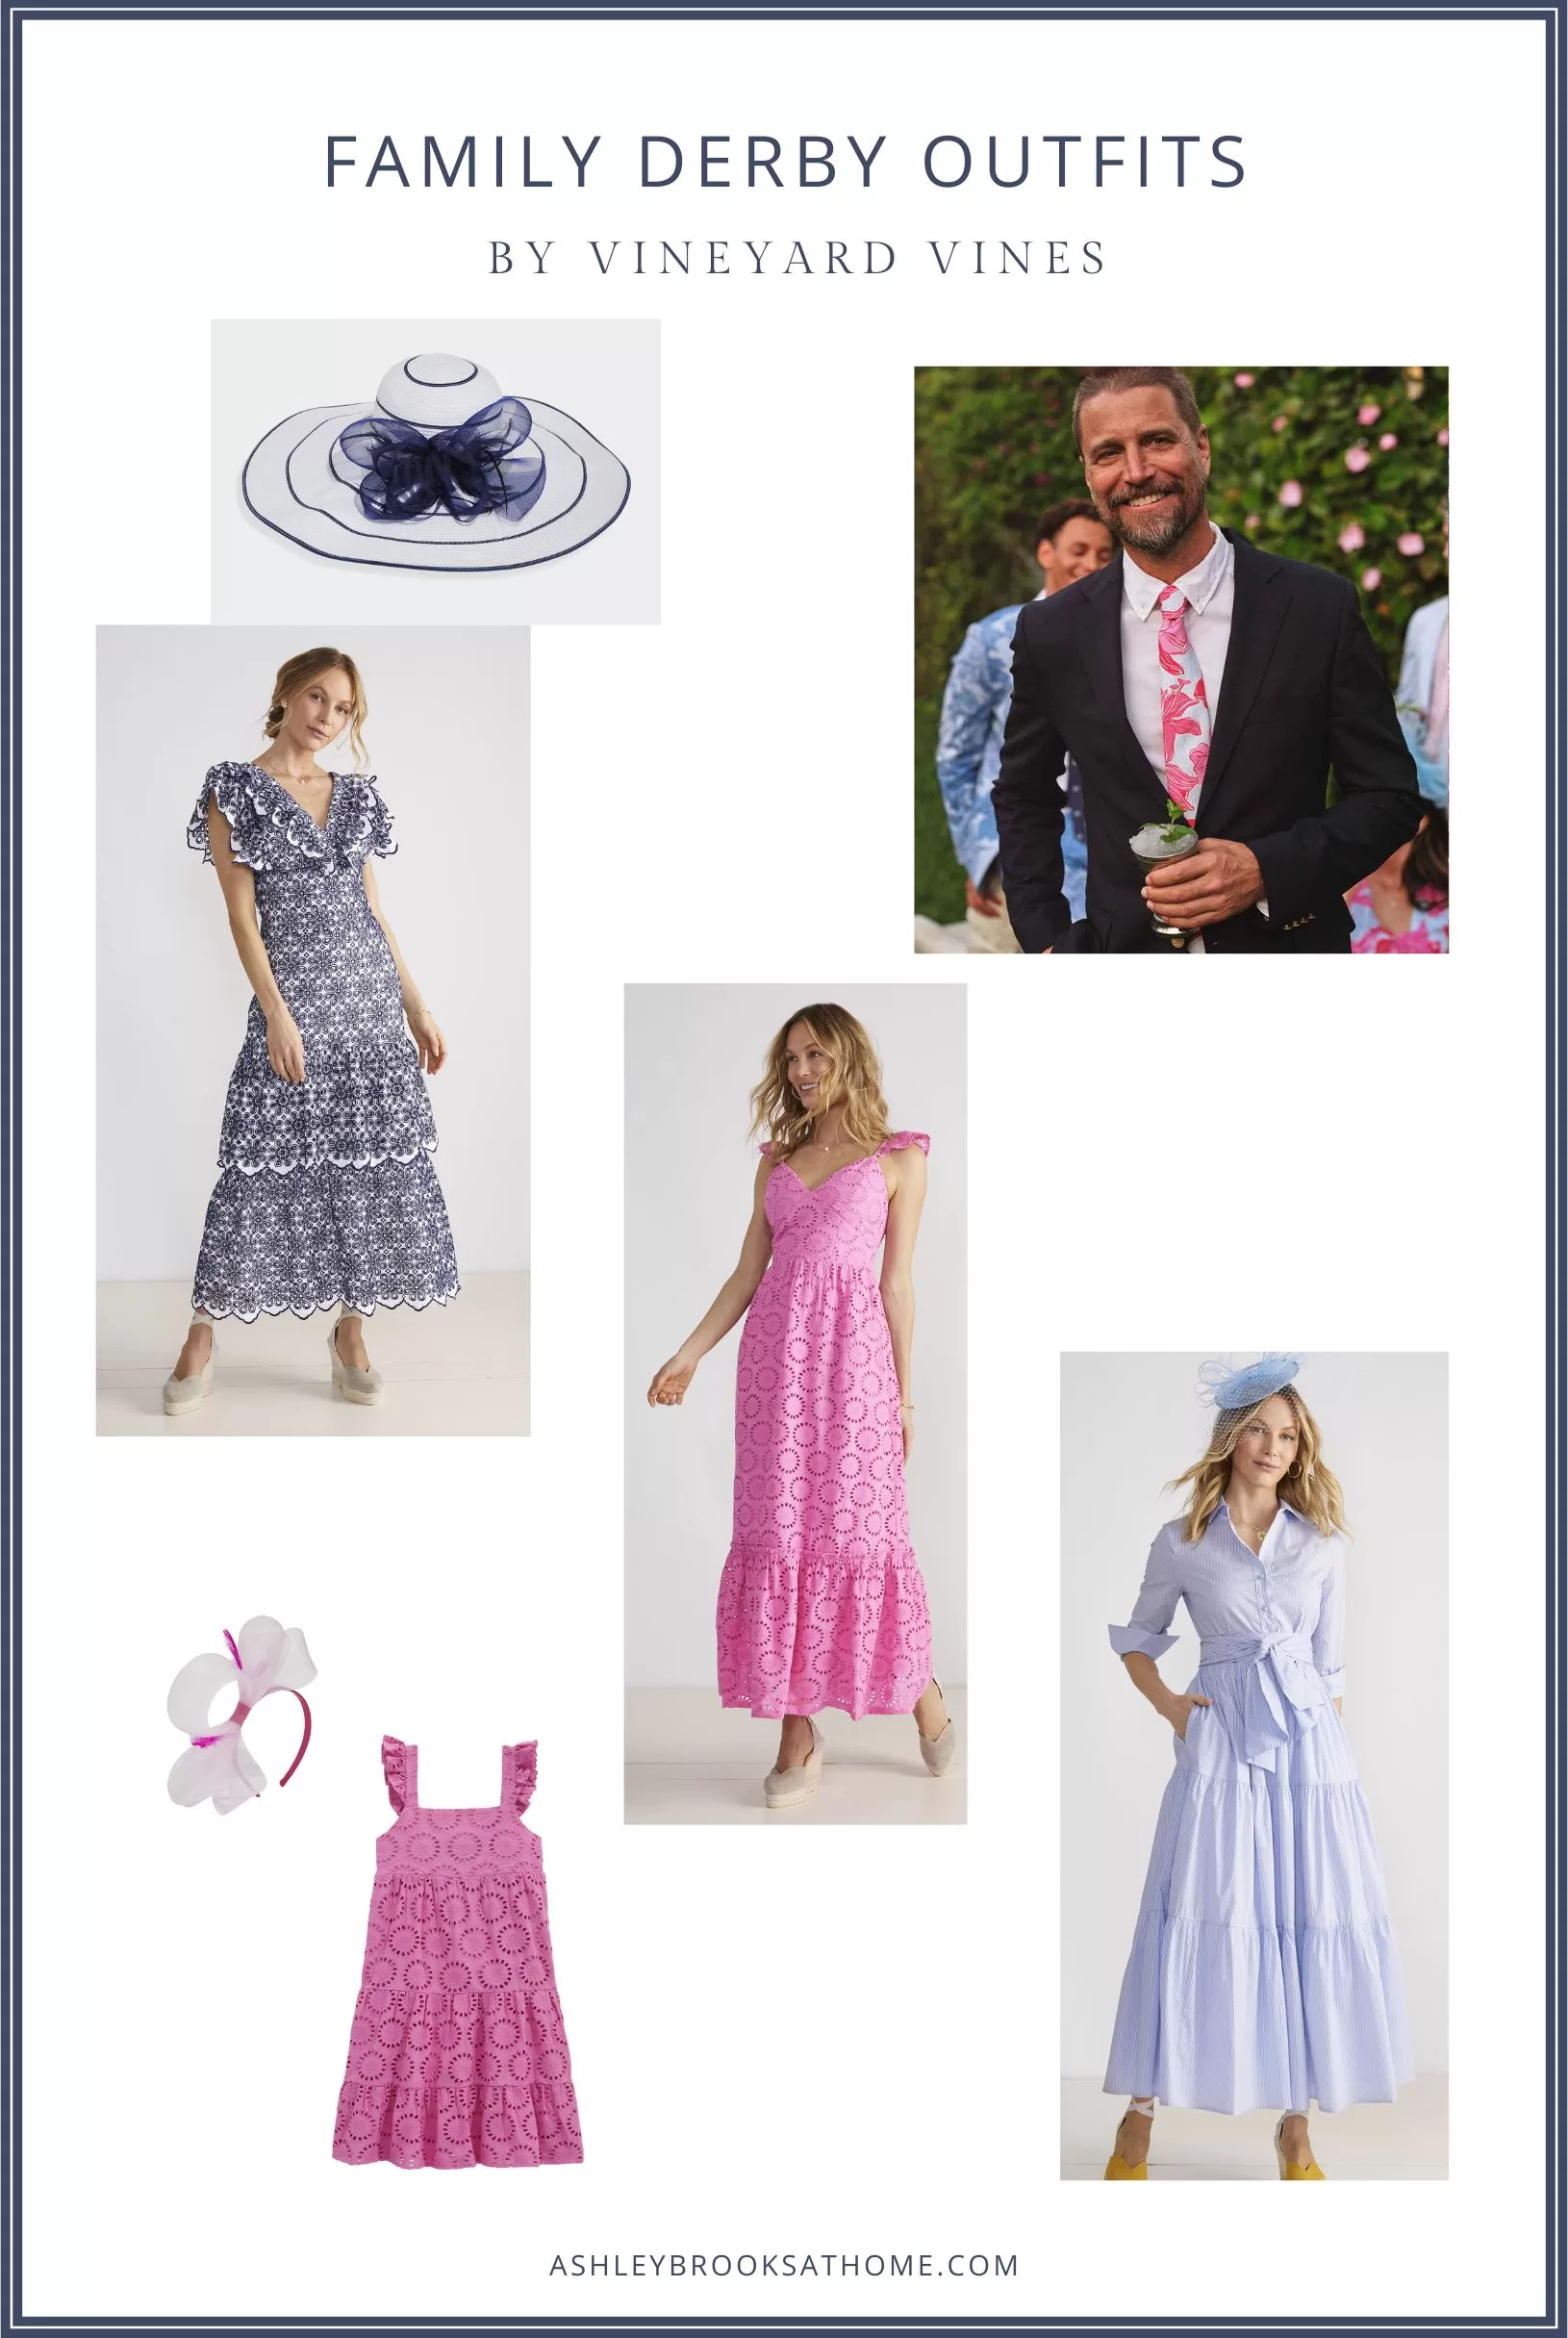 Vineyard Vines Family Derby Outfits Collage